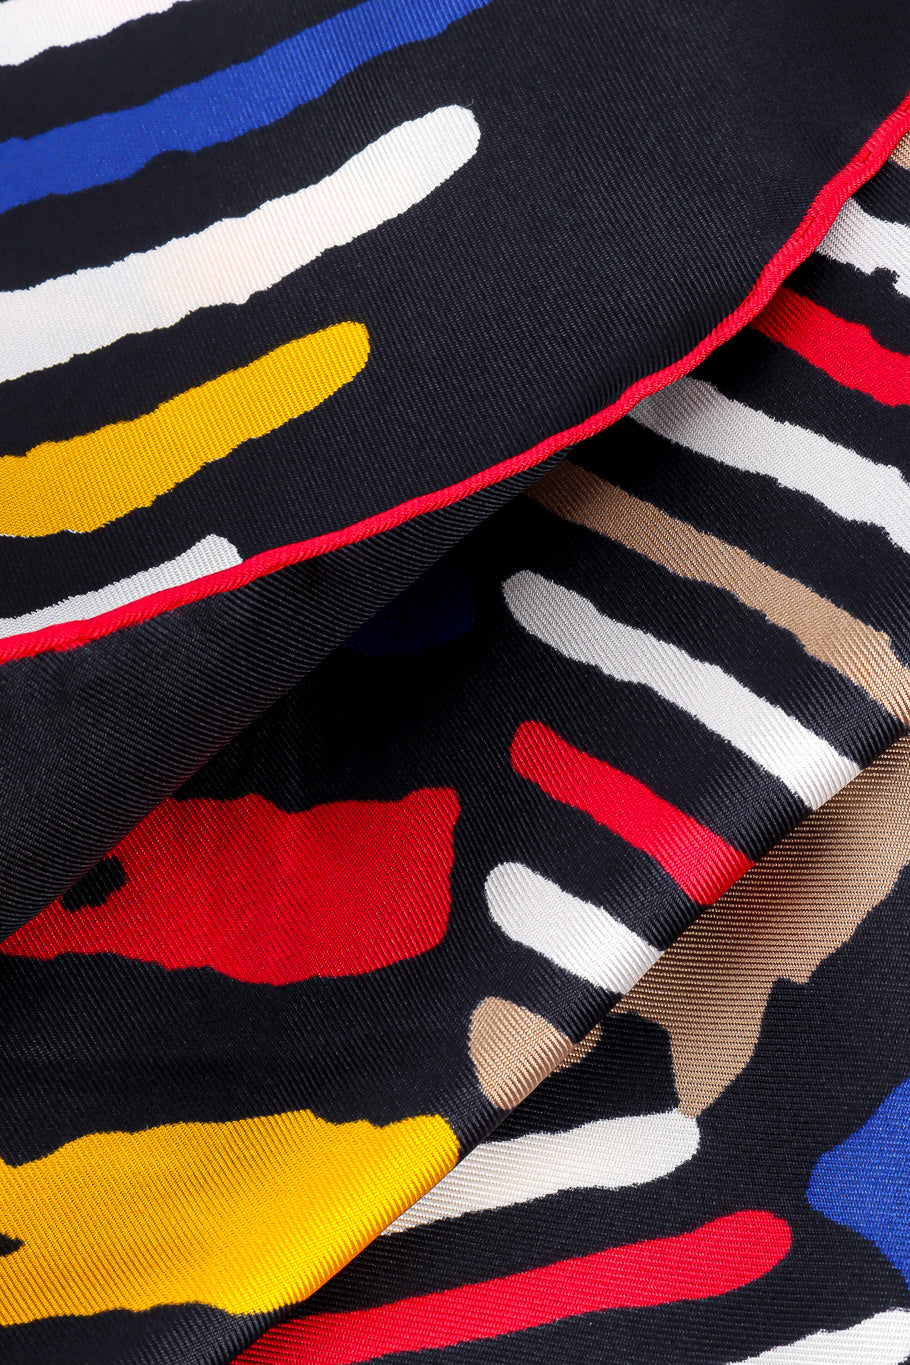 Striped scarf by Lanvin Close-up photo of fabric. @recessla